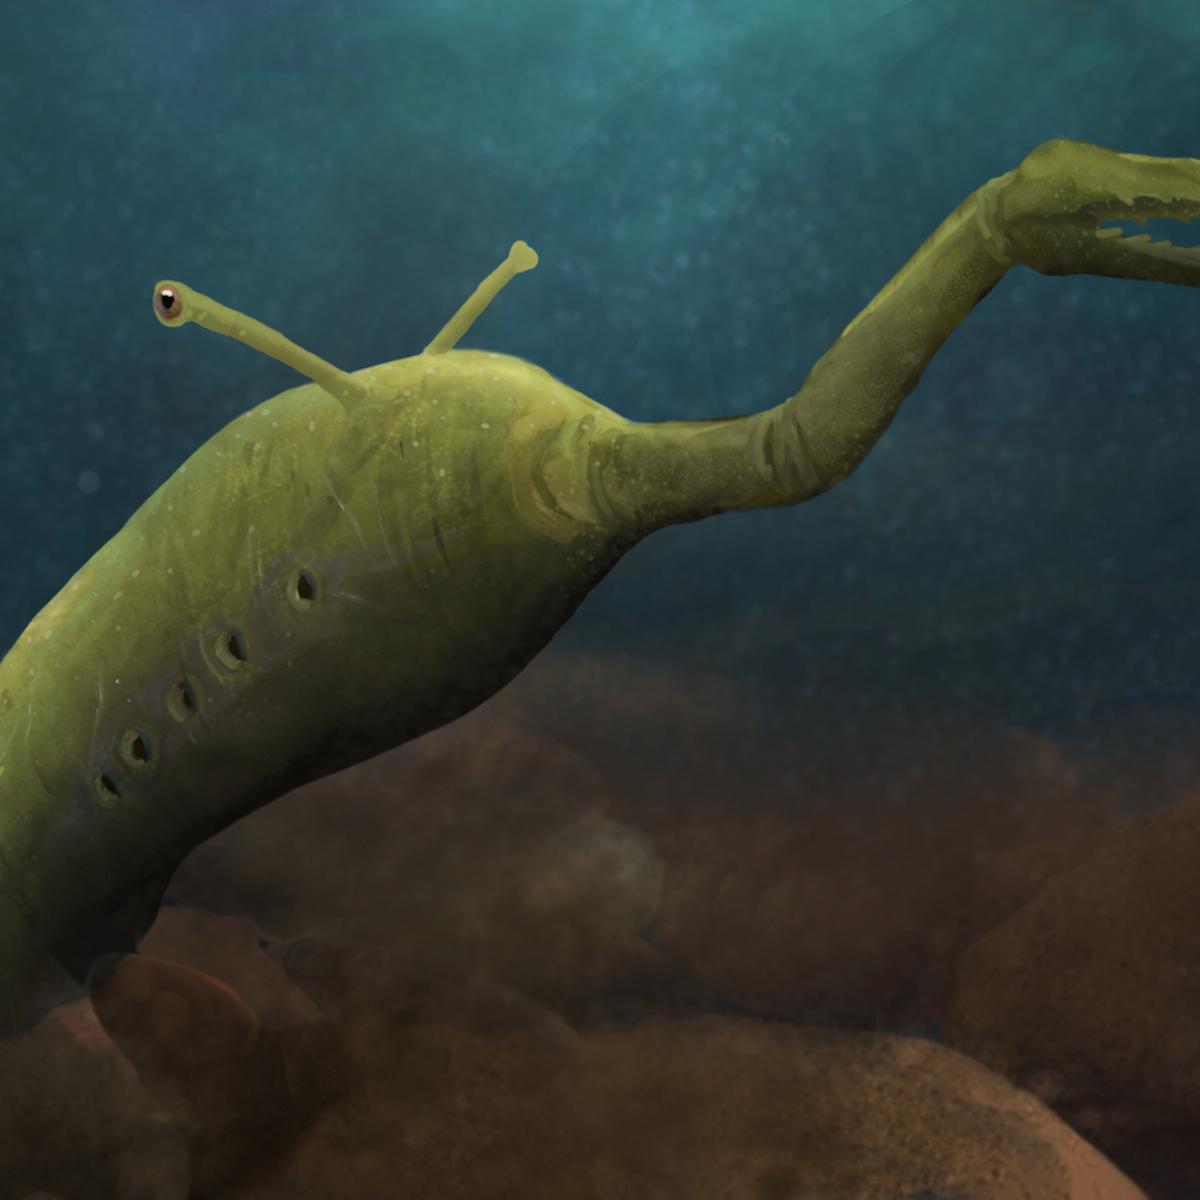 The mysterious 'Tully Monster' fossil just got more mysterious